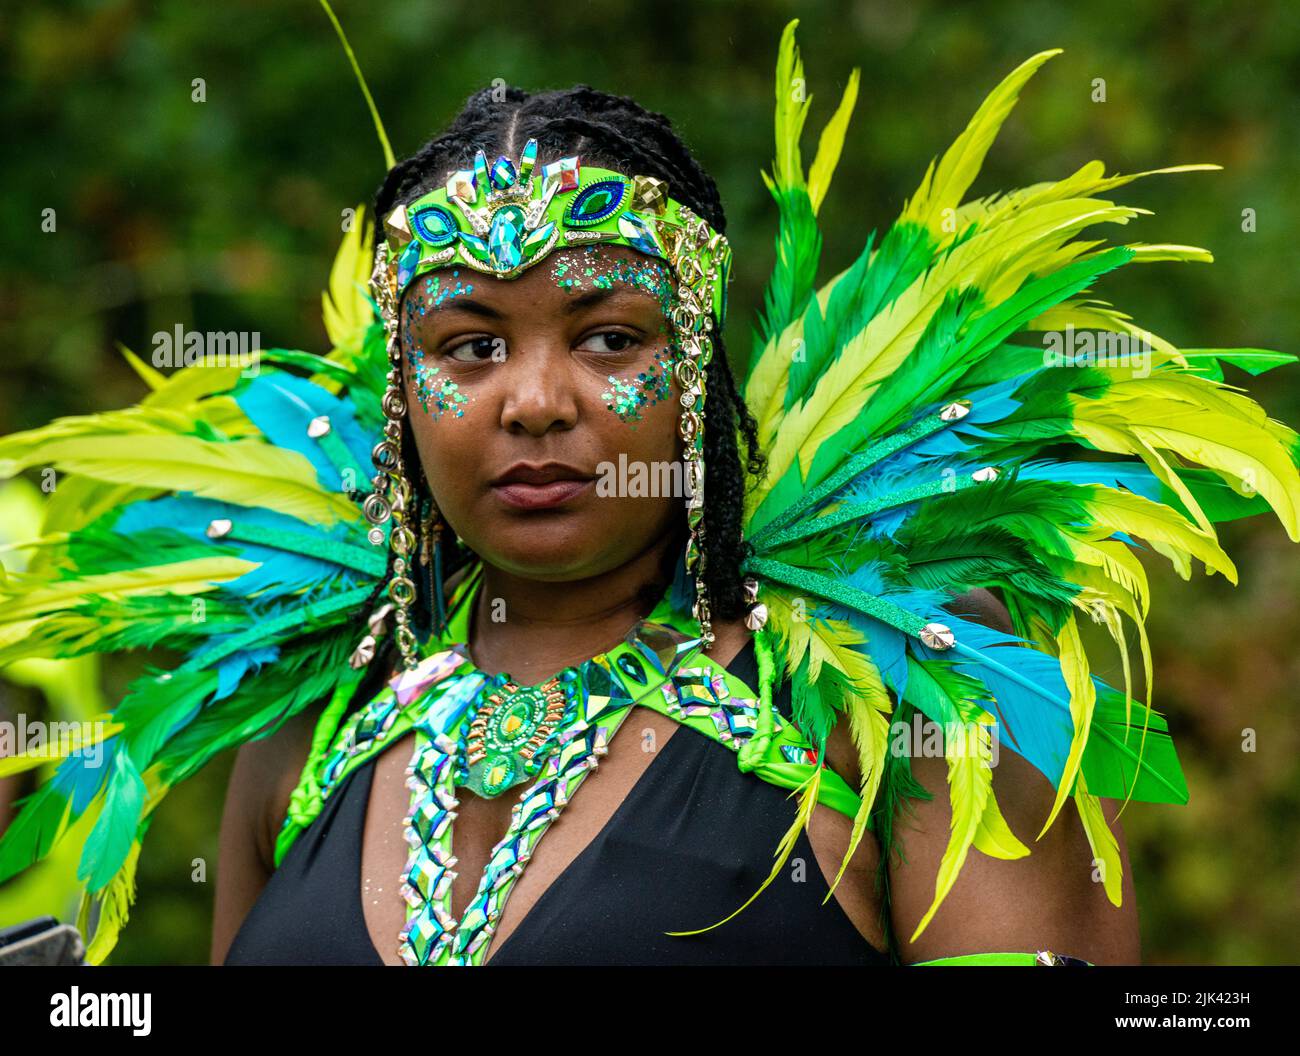 Harrogate, 30th July 2022. The Harrogate Carnival is taking place today under gloomy skies. A memmber of the Leeds West Indian Carnival takes a break. Picture Credit: ernesto rogata/Alamy Live News Stock Photo